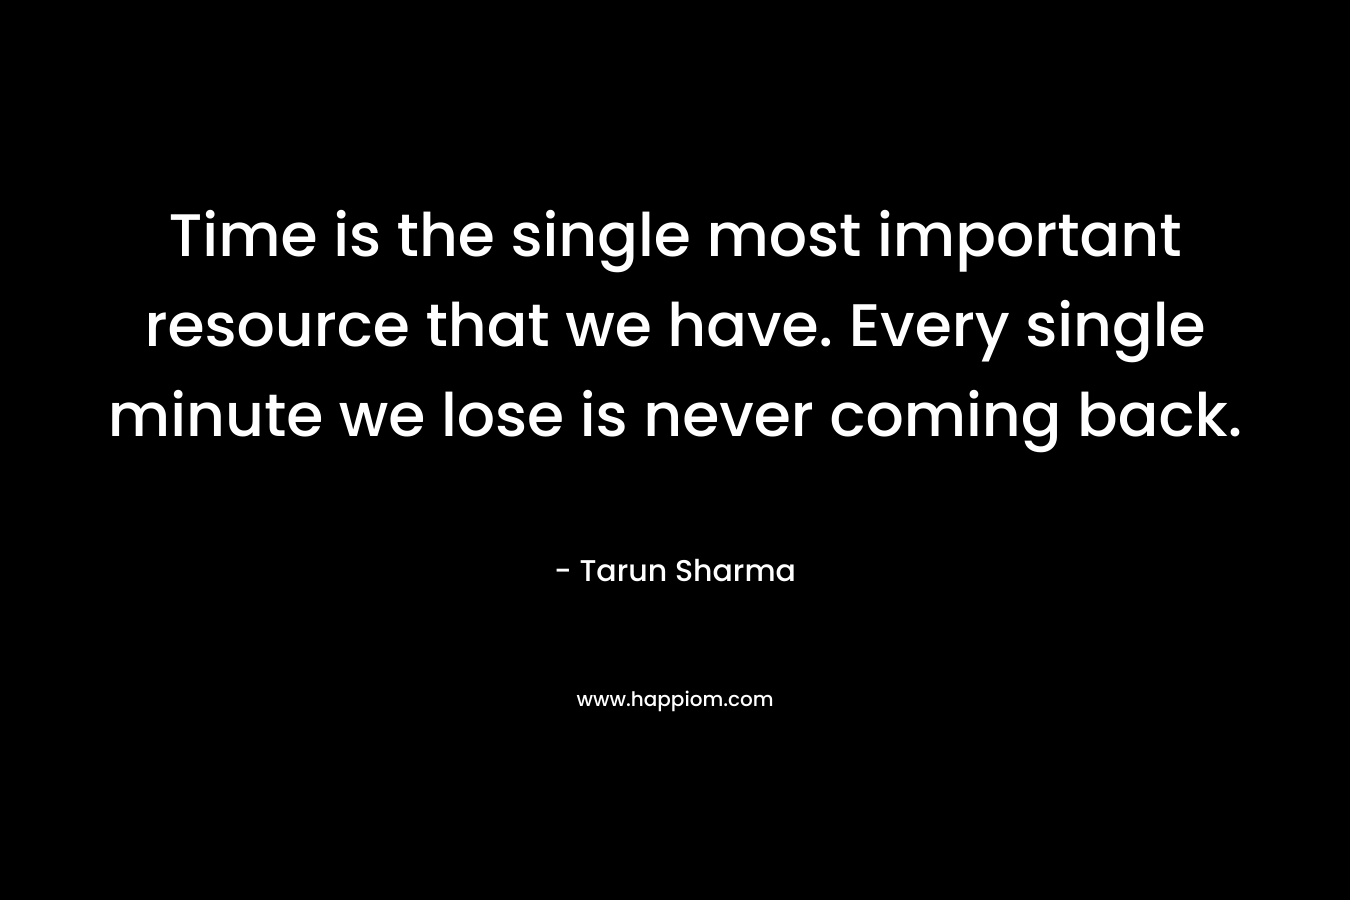 Time is the single most important resource that we have. Every single minute we lose is never coming back.